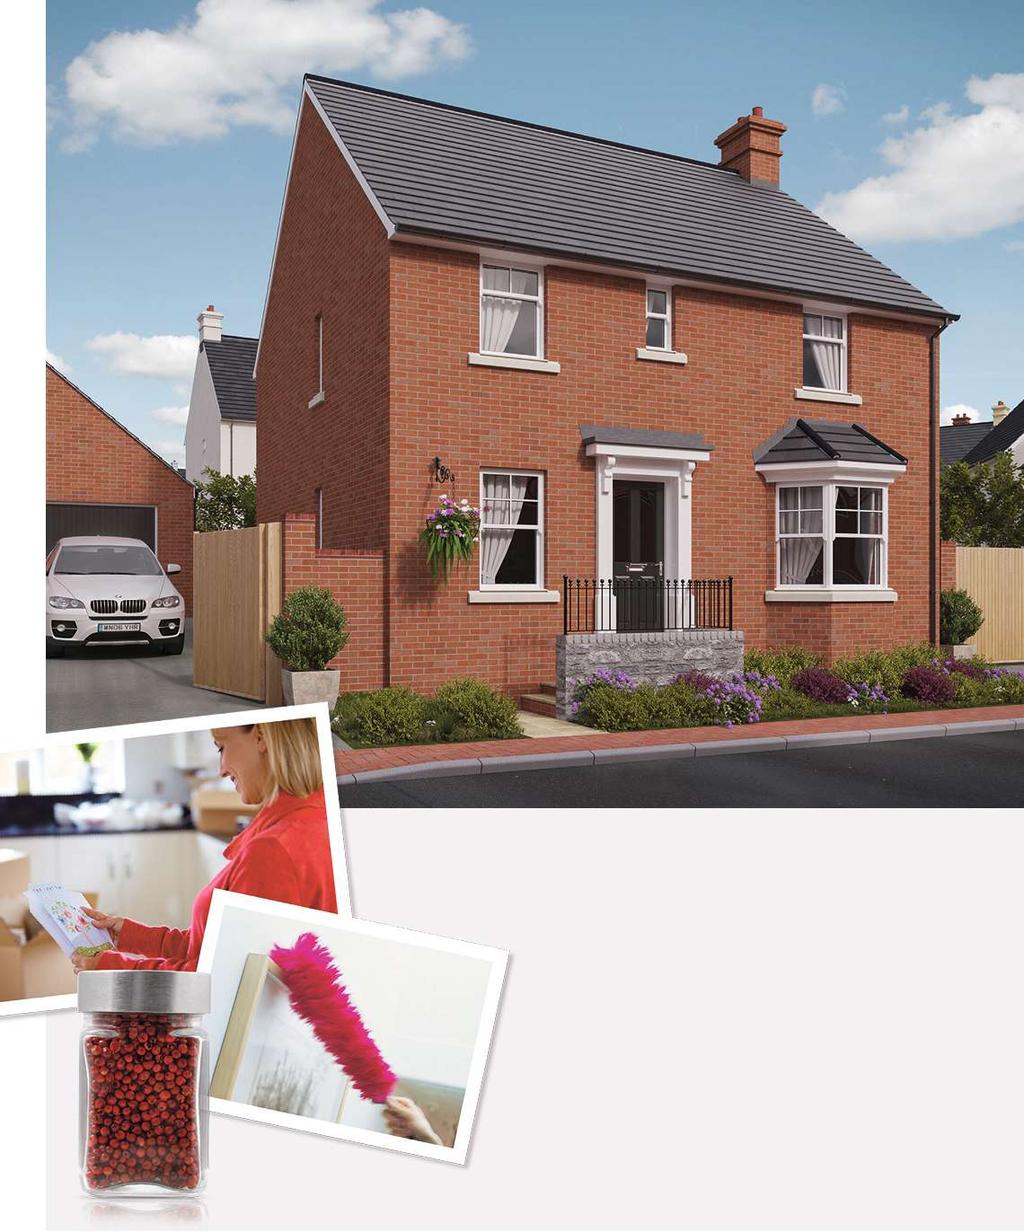 EDLOGAN WHARF The Shelford 4 bedroom home A carefully considered layout and stylish design make The Shelford ideal for family life.